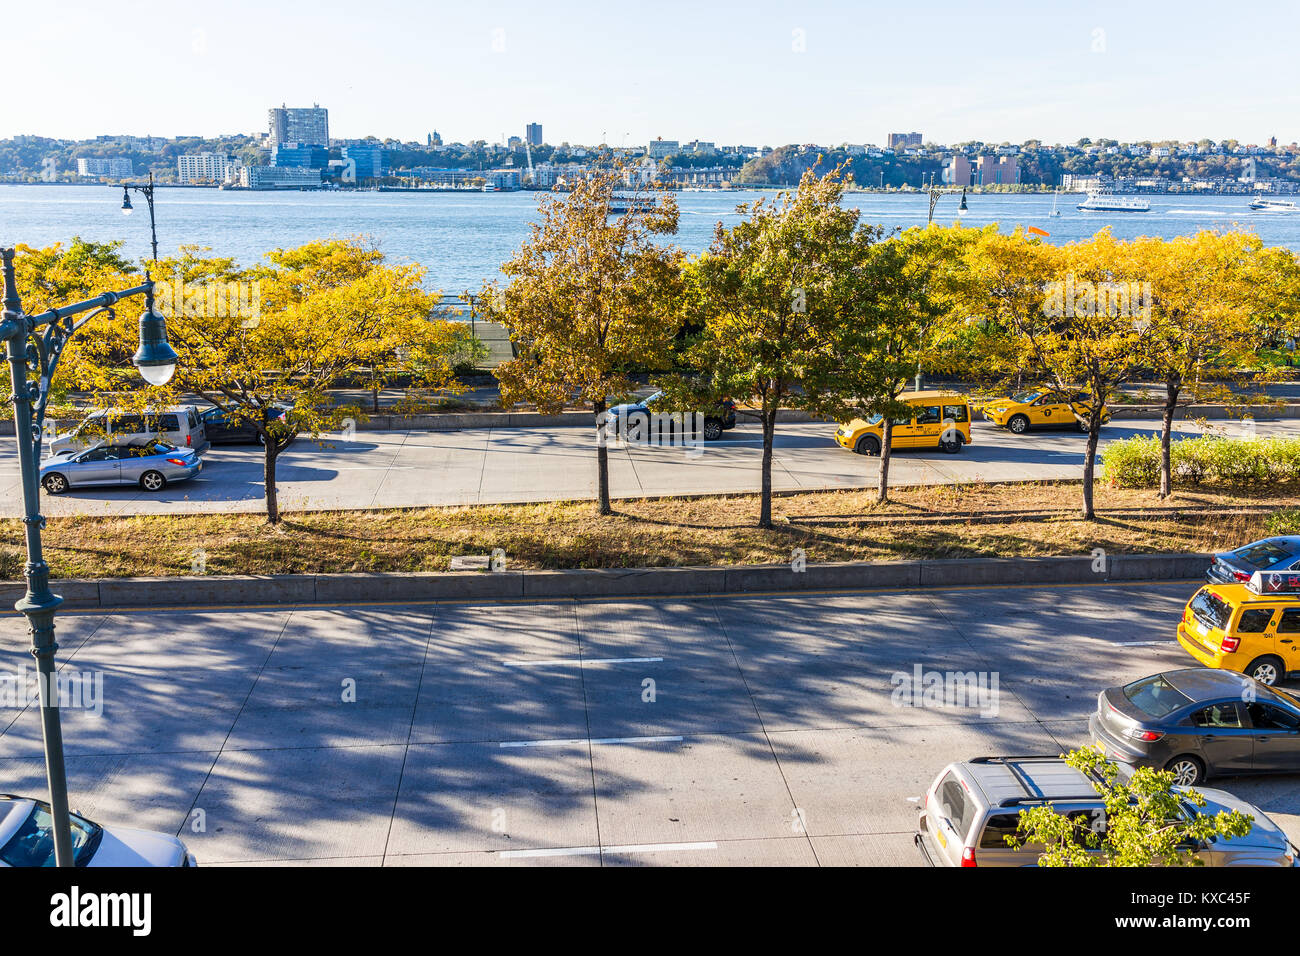 New York City, USA - October 27, 2017: View of Hudson River from highline, high line, urban in NYC with 12th avenue below, in Chelsea West Side by Hud Stock Photo